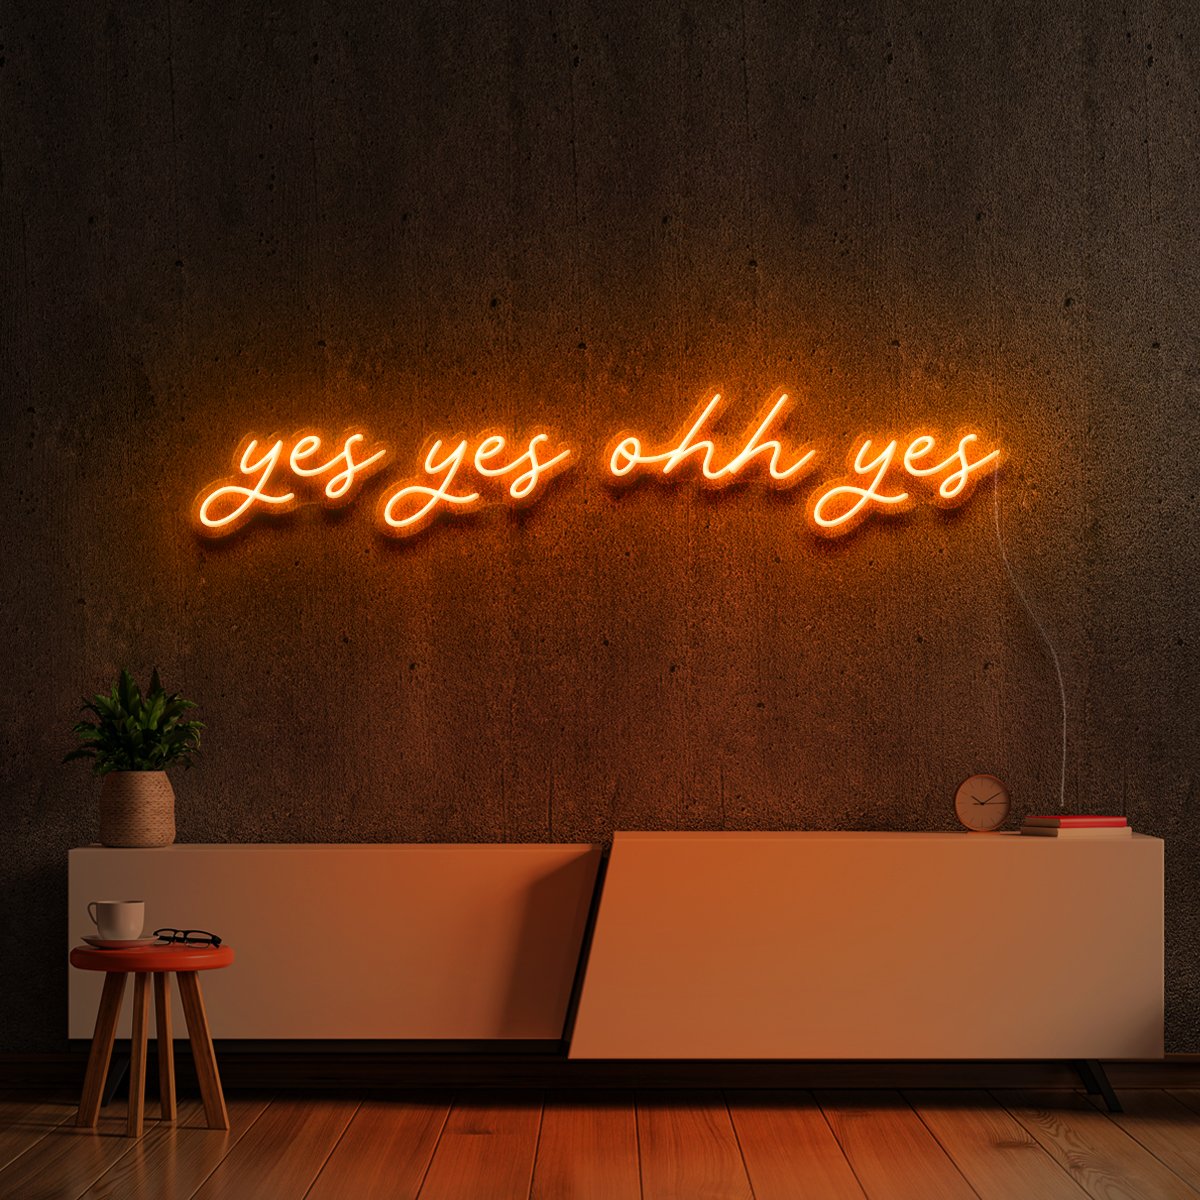 "Yes Yes Ohh Yes" Neon Sign 90cm (3ft) / Orange / LED Neon by Neon Icons